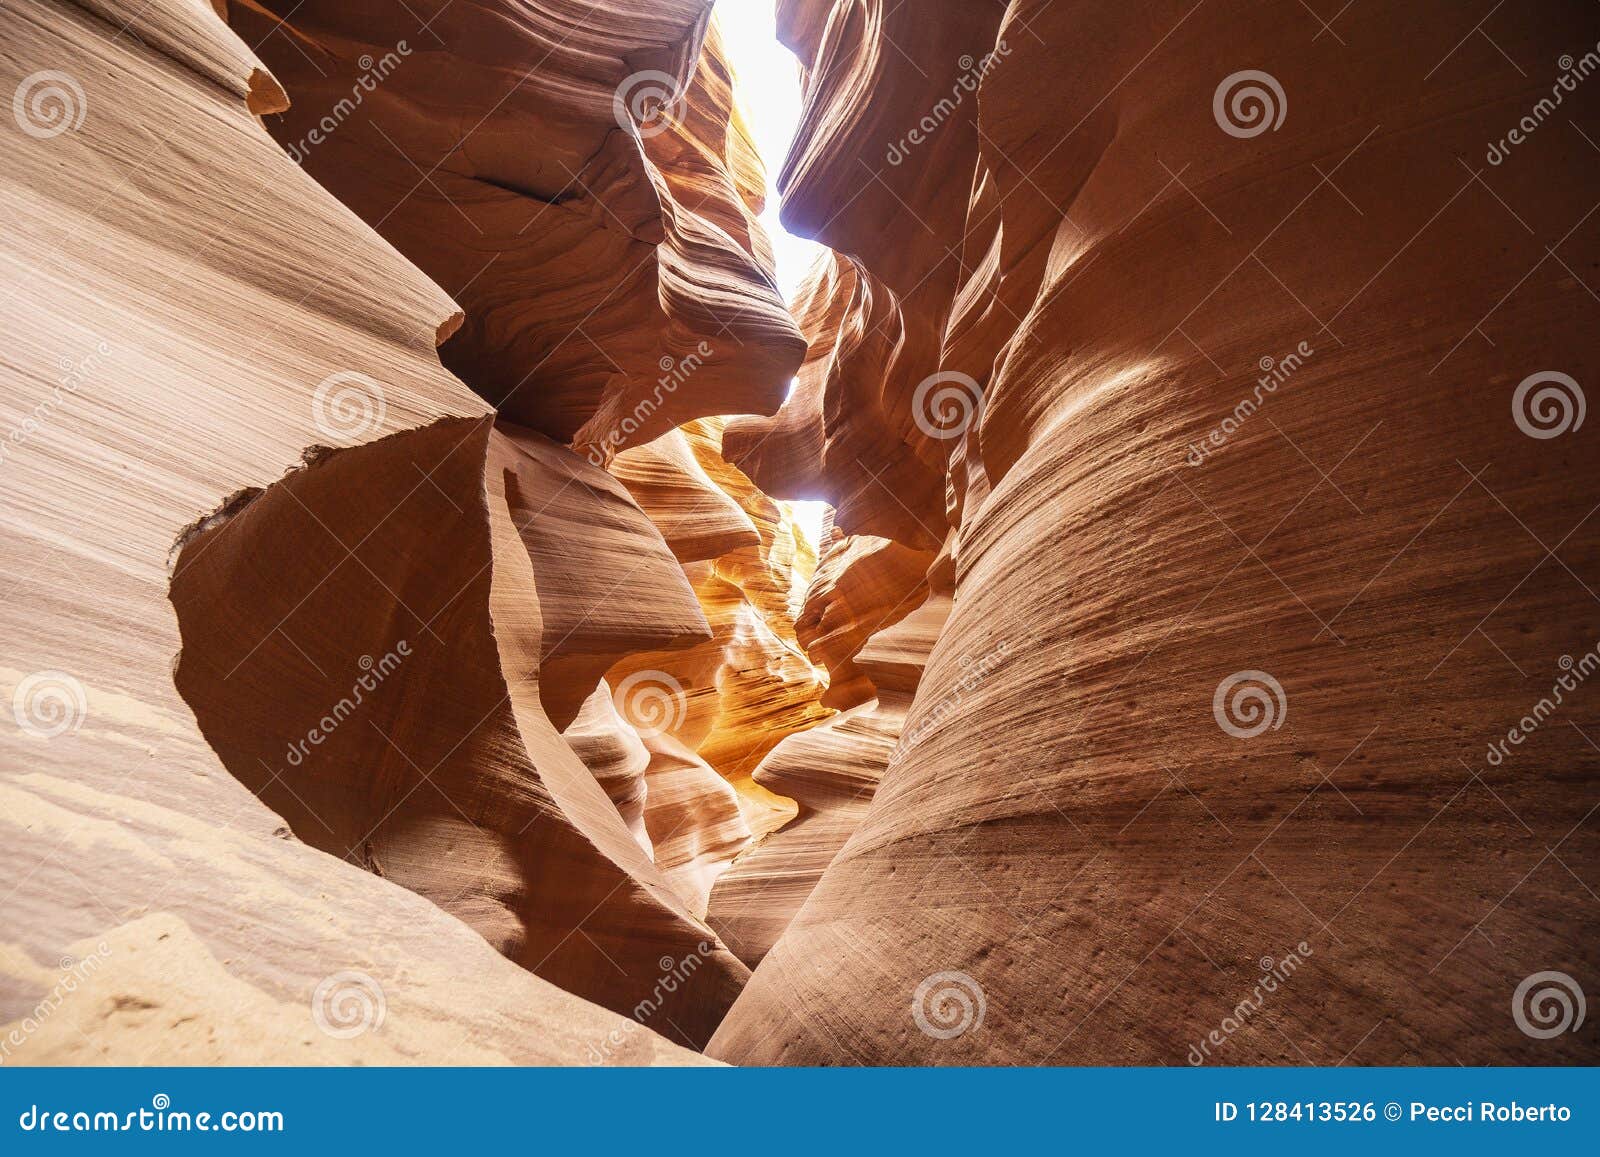 the antelope canyons, lower canyon